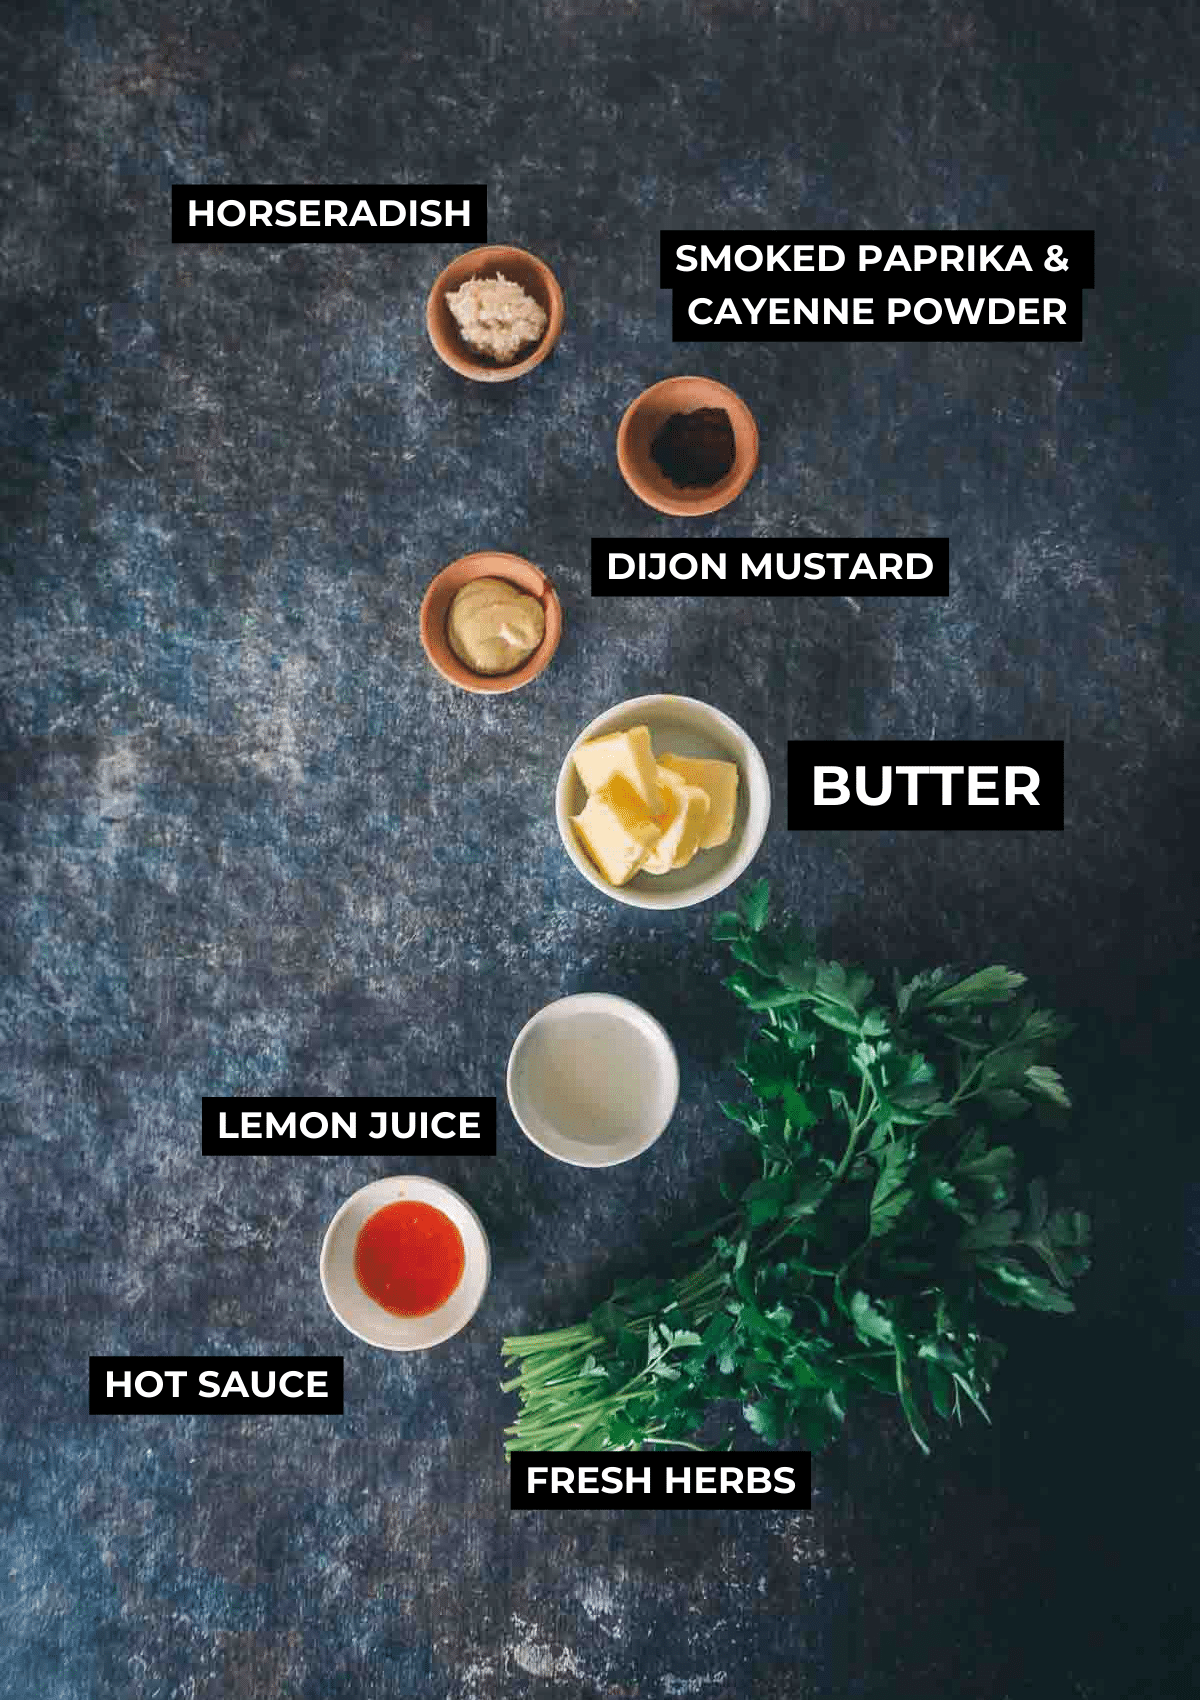 Ingredients arranged on a rustic surface.  